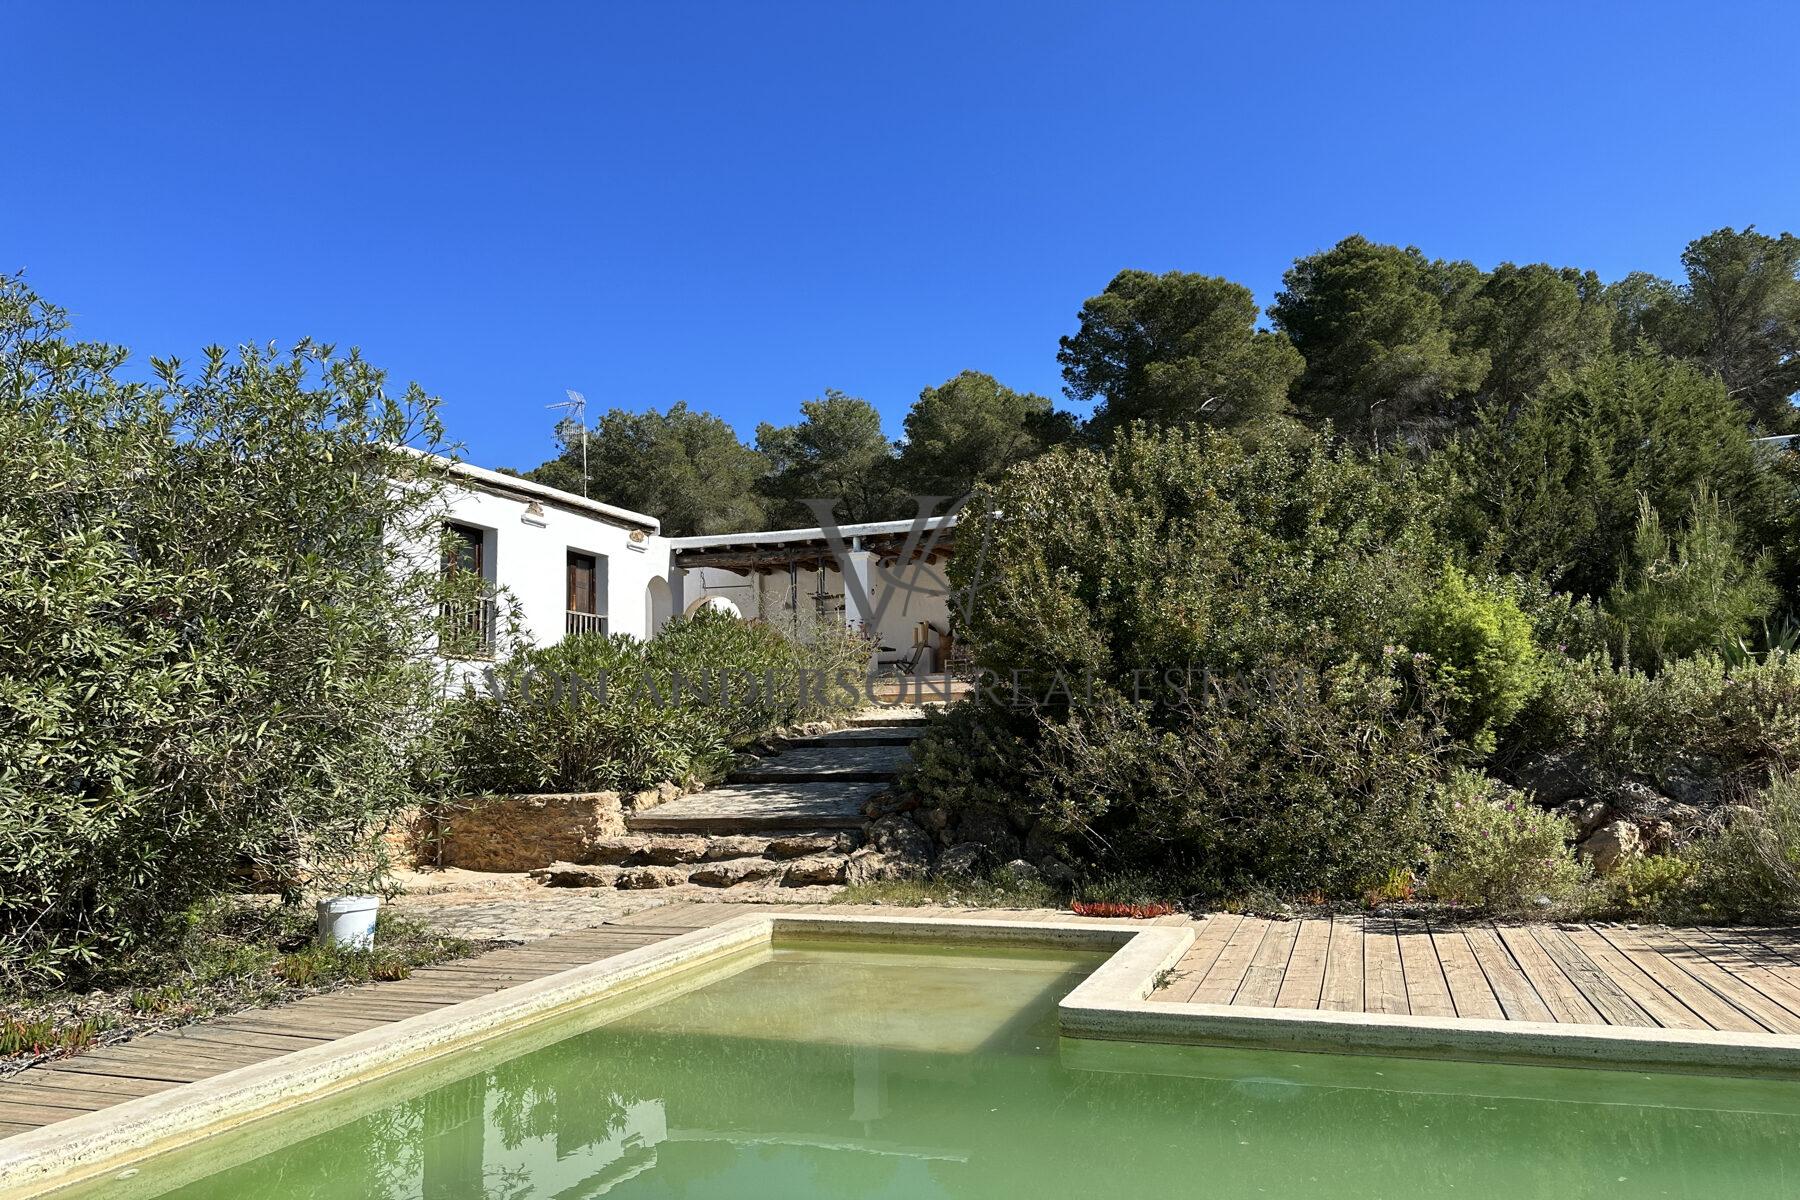 Enchanting Country Finca with Guest House Set on a Large Plot near Es Cubells, ref. VA1047, for sale in Ibiza by Von Anderson Real Estate